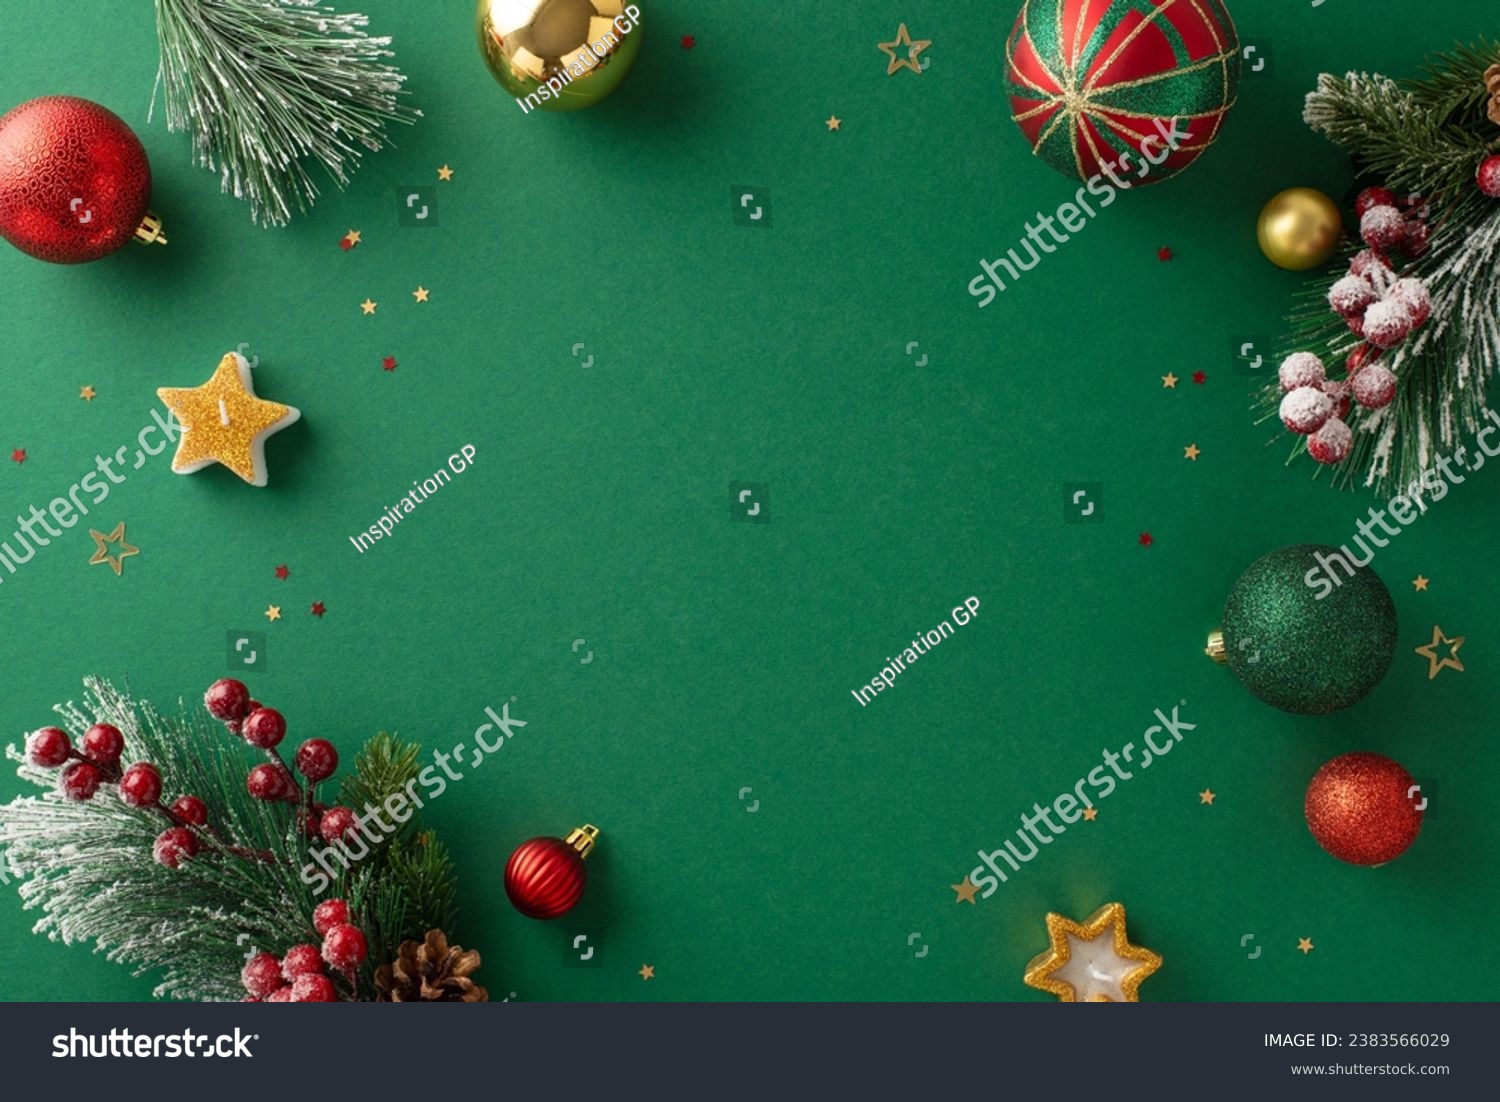 Magnificent Christmas decor to enjoyable party. Top view of gleaming balls, star-shaped candles, scattered confetti, frosted pine branches, festive holly berries on verdant backdrop with text space #2383566029